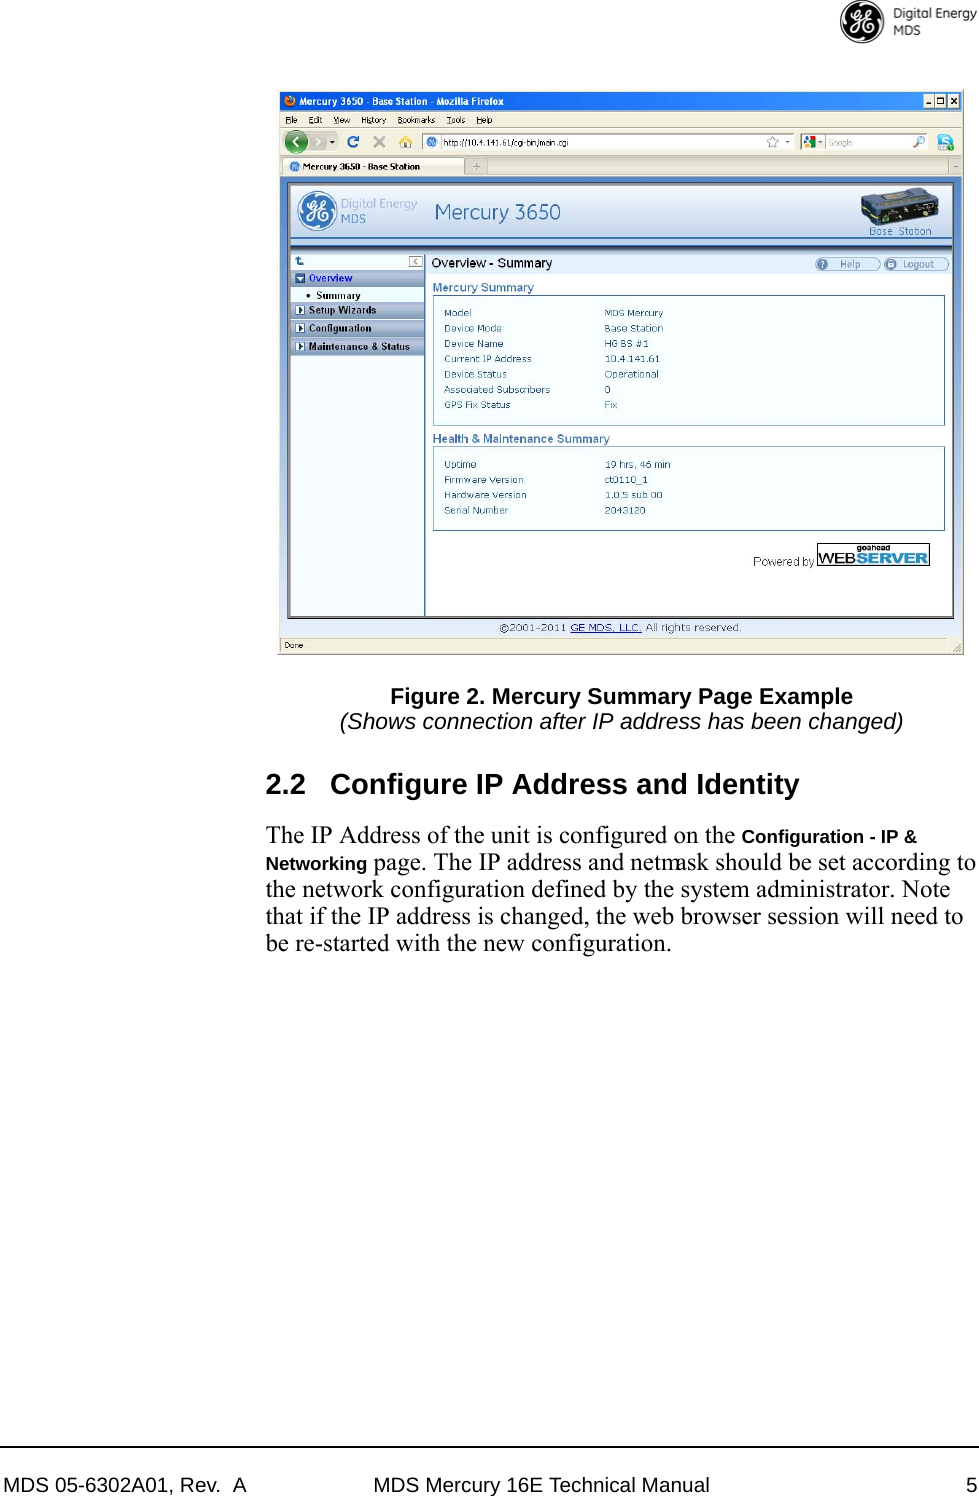 MDS 05-6302A01, Rev.  A MDS Mercury 16E Technical Manual 5Invisible place holderFigure 2. Mercury Summary Page Example(Shows connection after IP address has been changed)2.2 Configure IP Address and IdentityThe IP Address of the unit is configured on the Configuration - IP &amp; Networking page. The IP address and netmask should be set according to the network configuration defined by the system administrator. Note that if the IP address is changed, the web browser session will need to be re-started with the new configuration. 